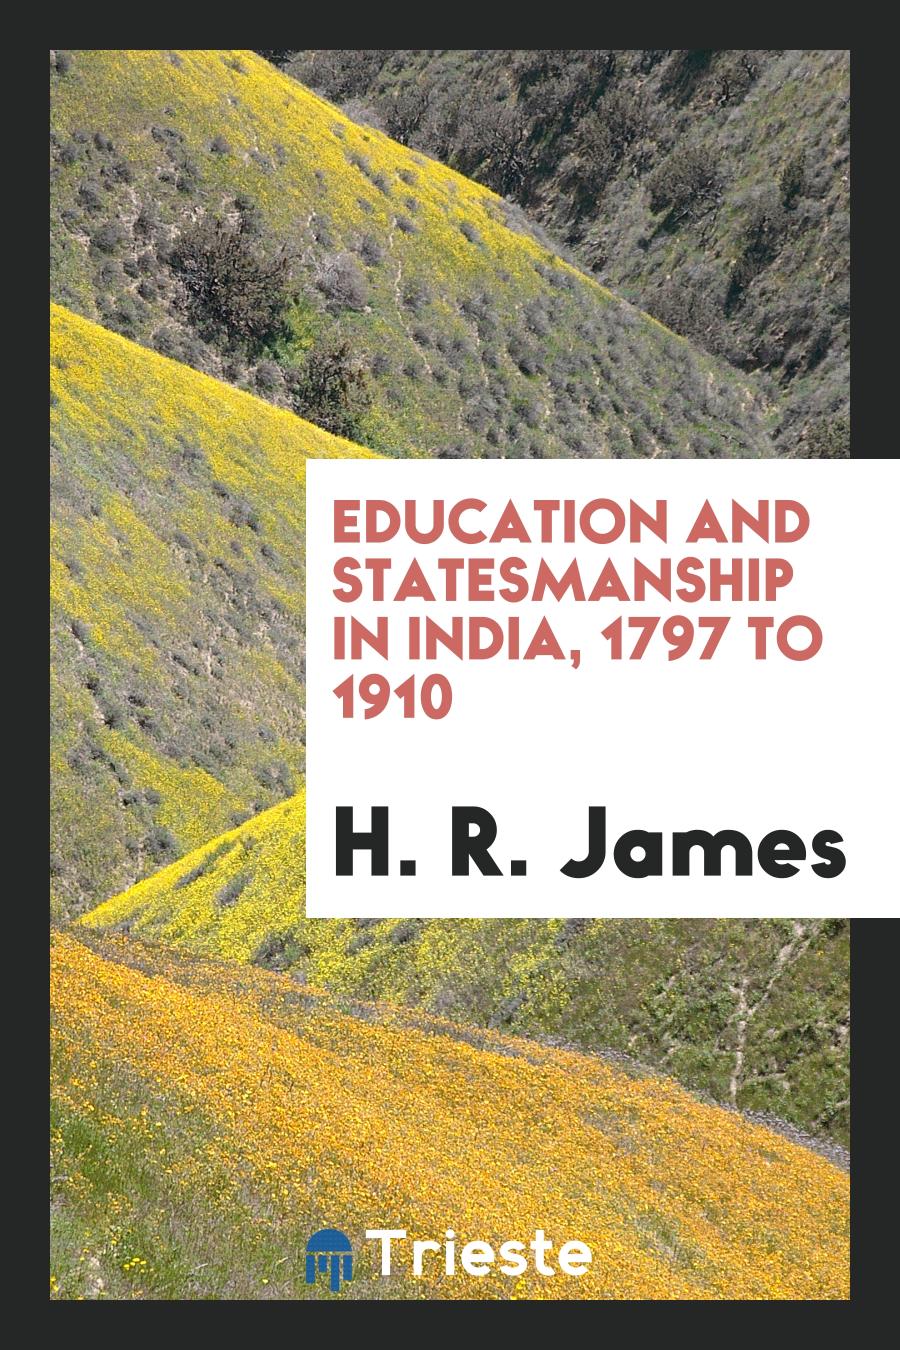 Education and Statesmanship in India, 1797 to 1910